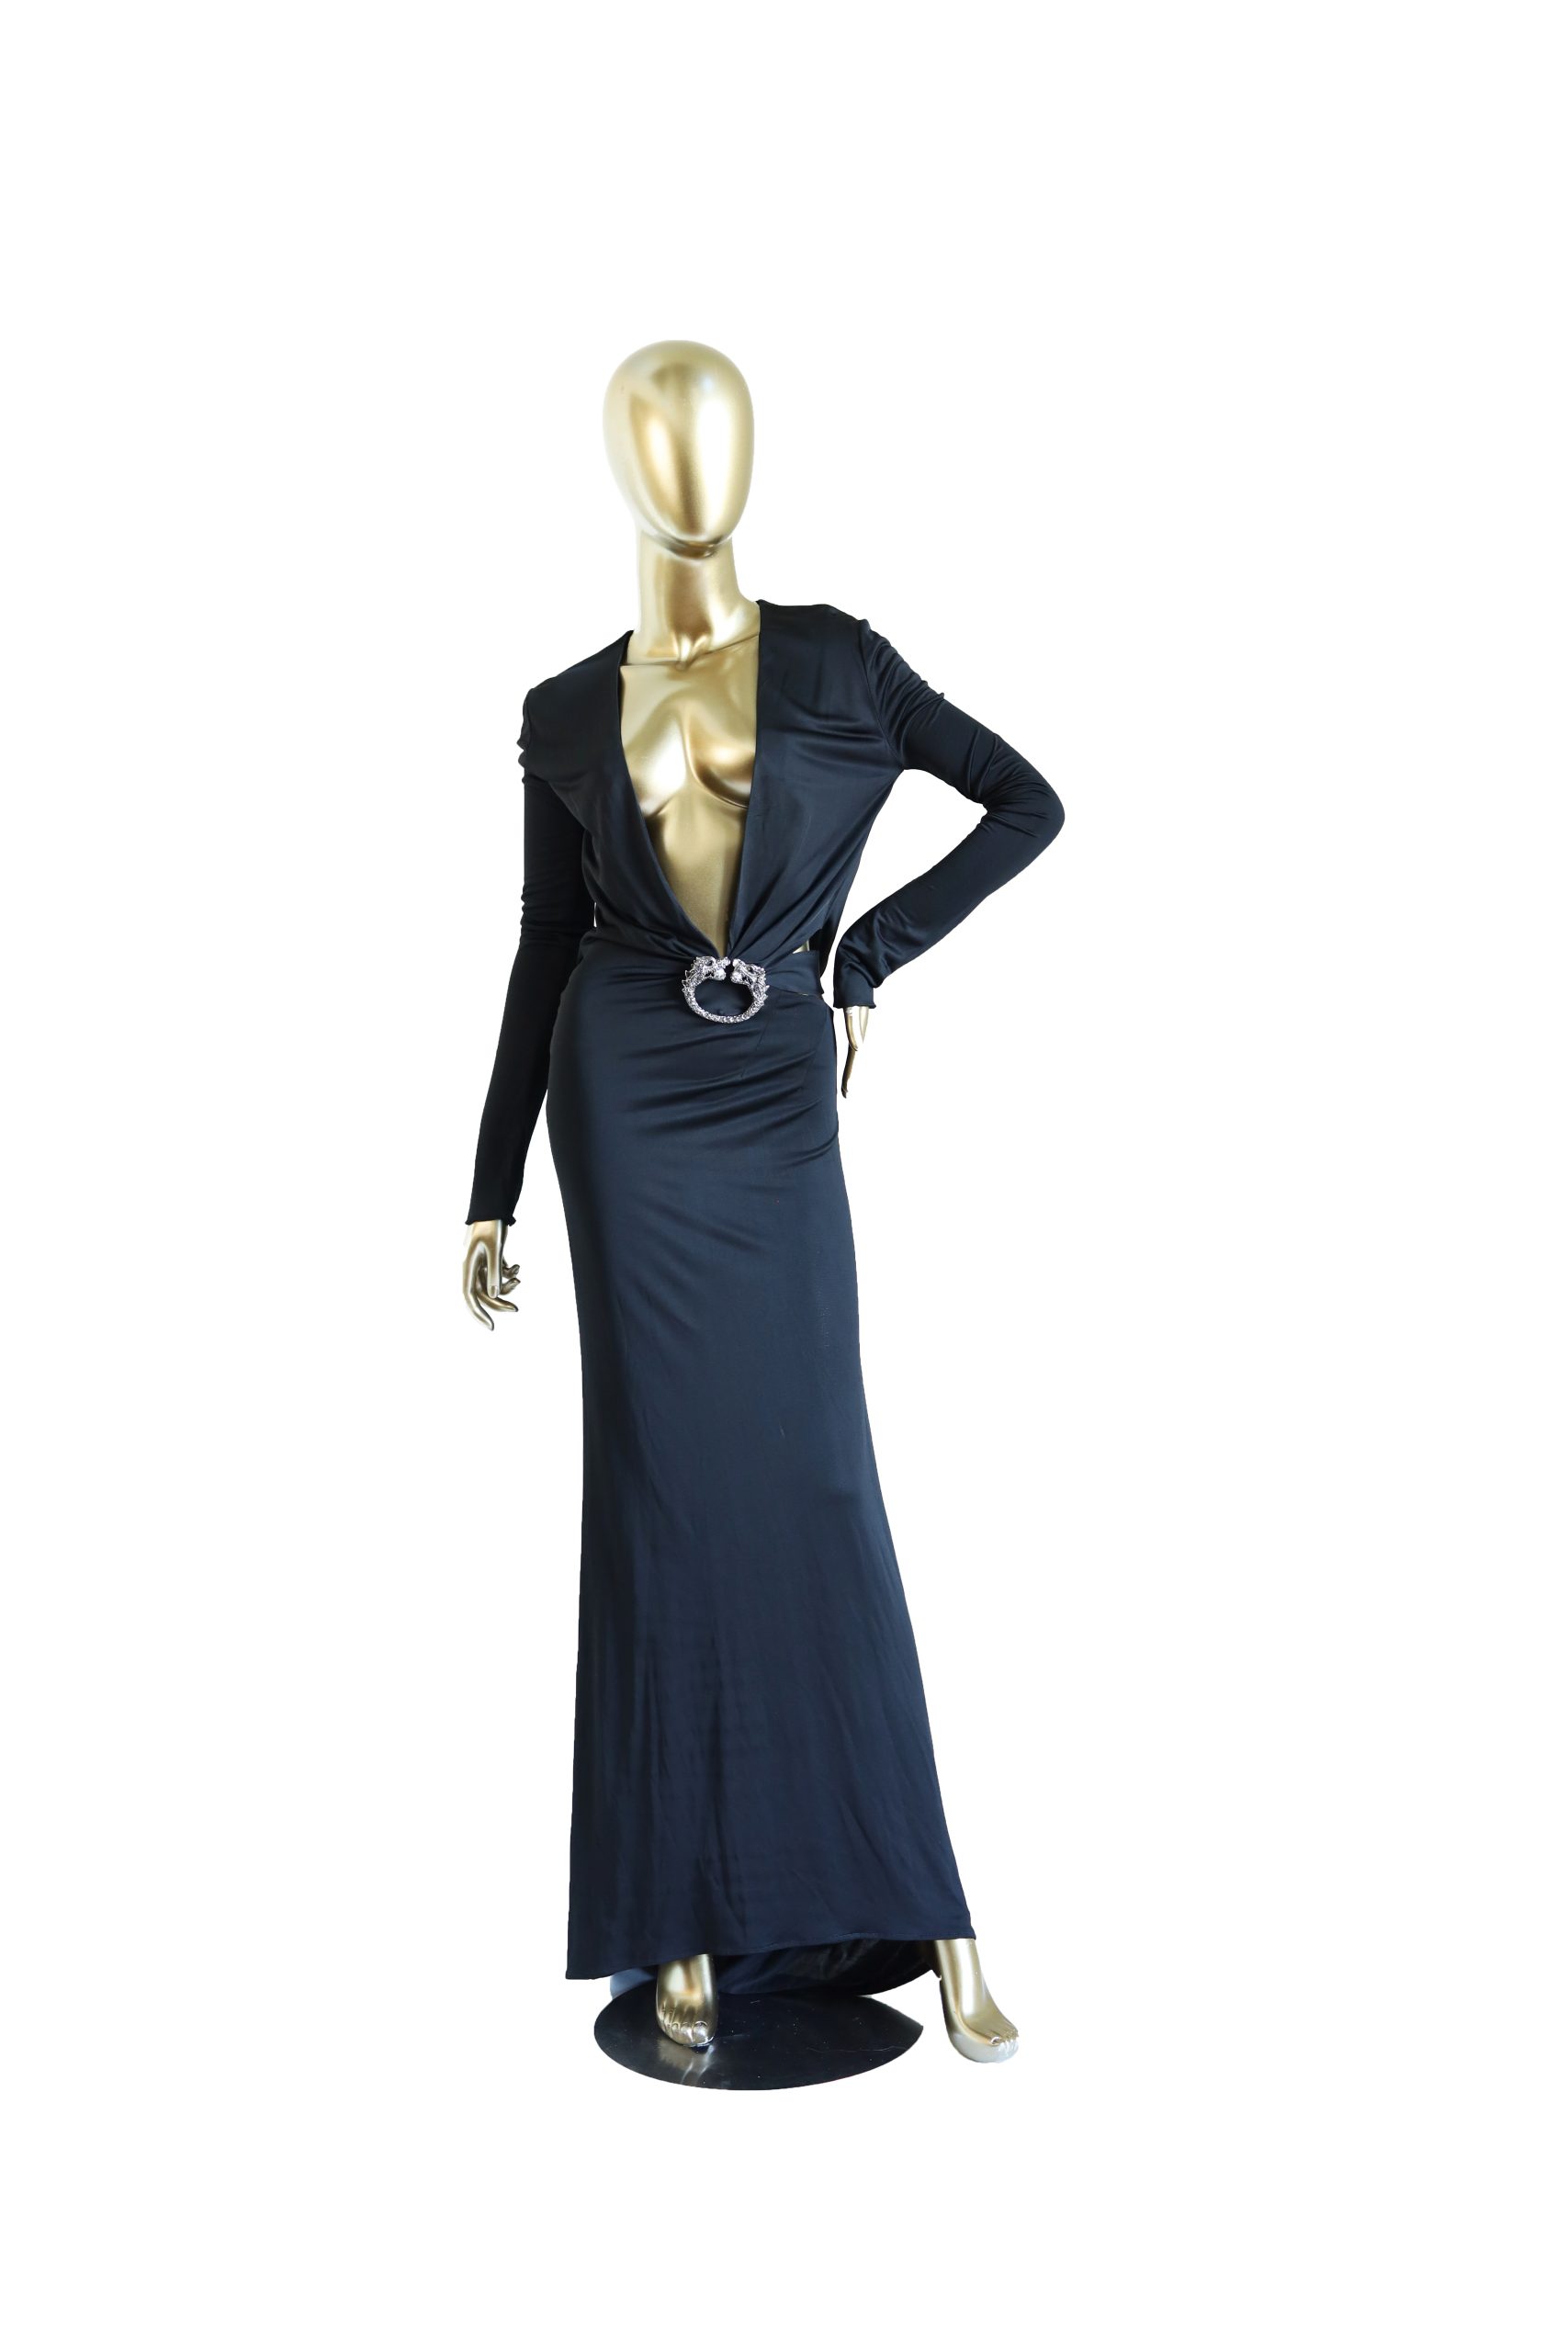 GUCCI by Tom Ford Vintage Gown - Janet Mandell